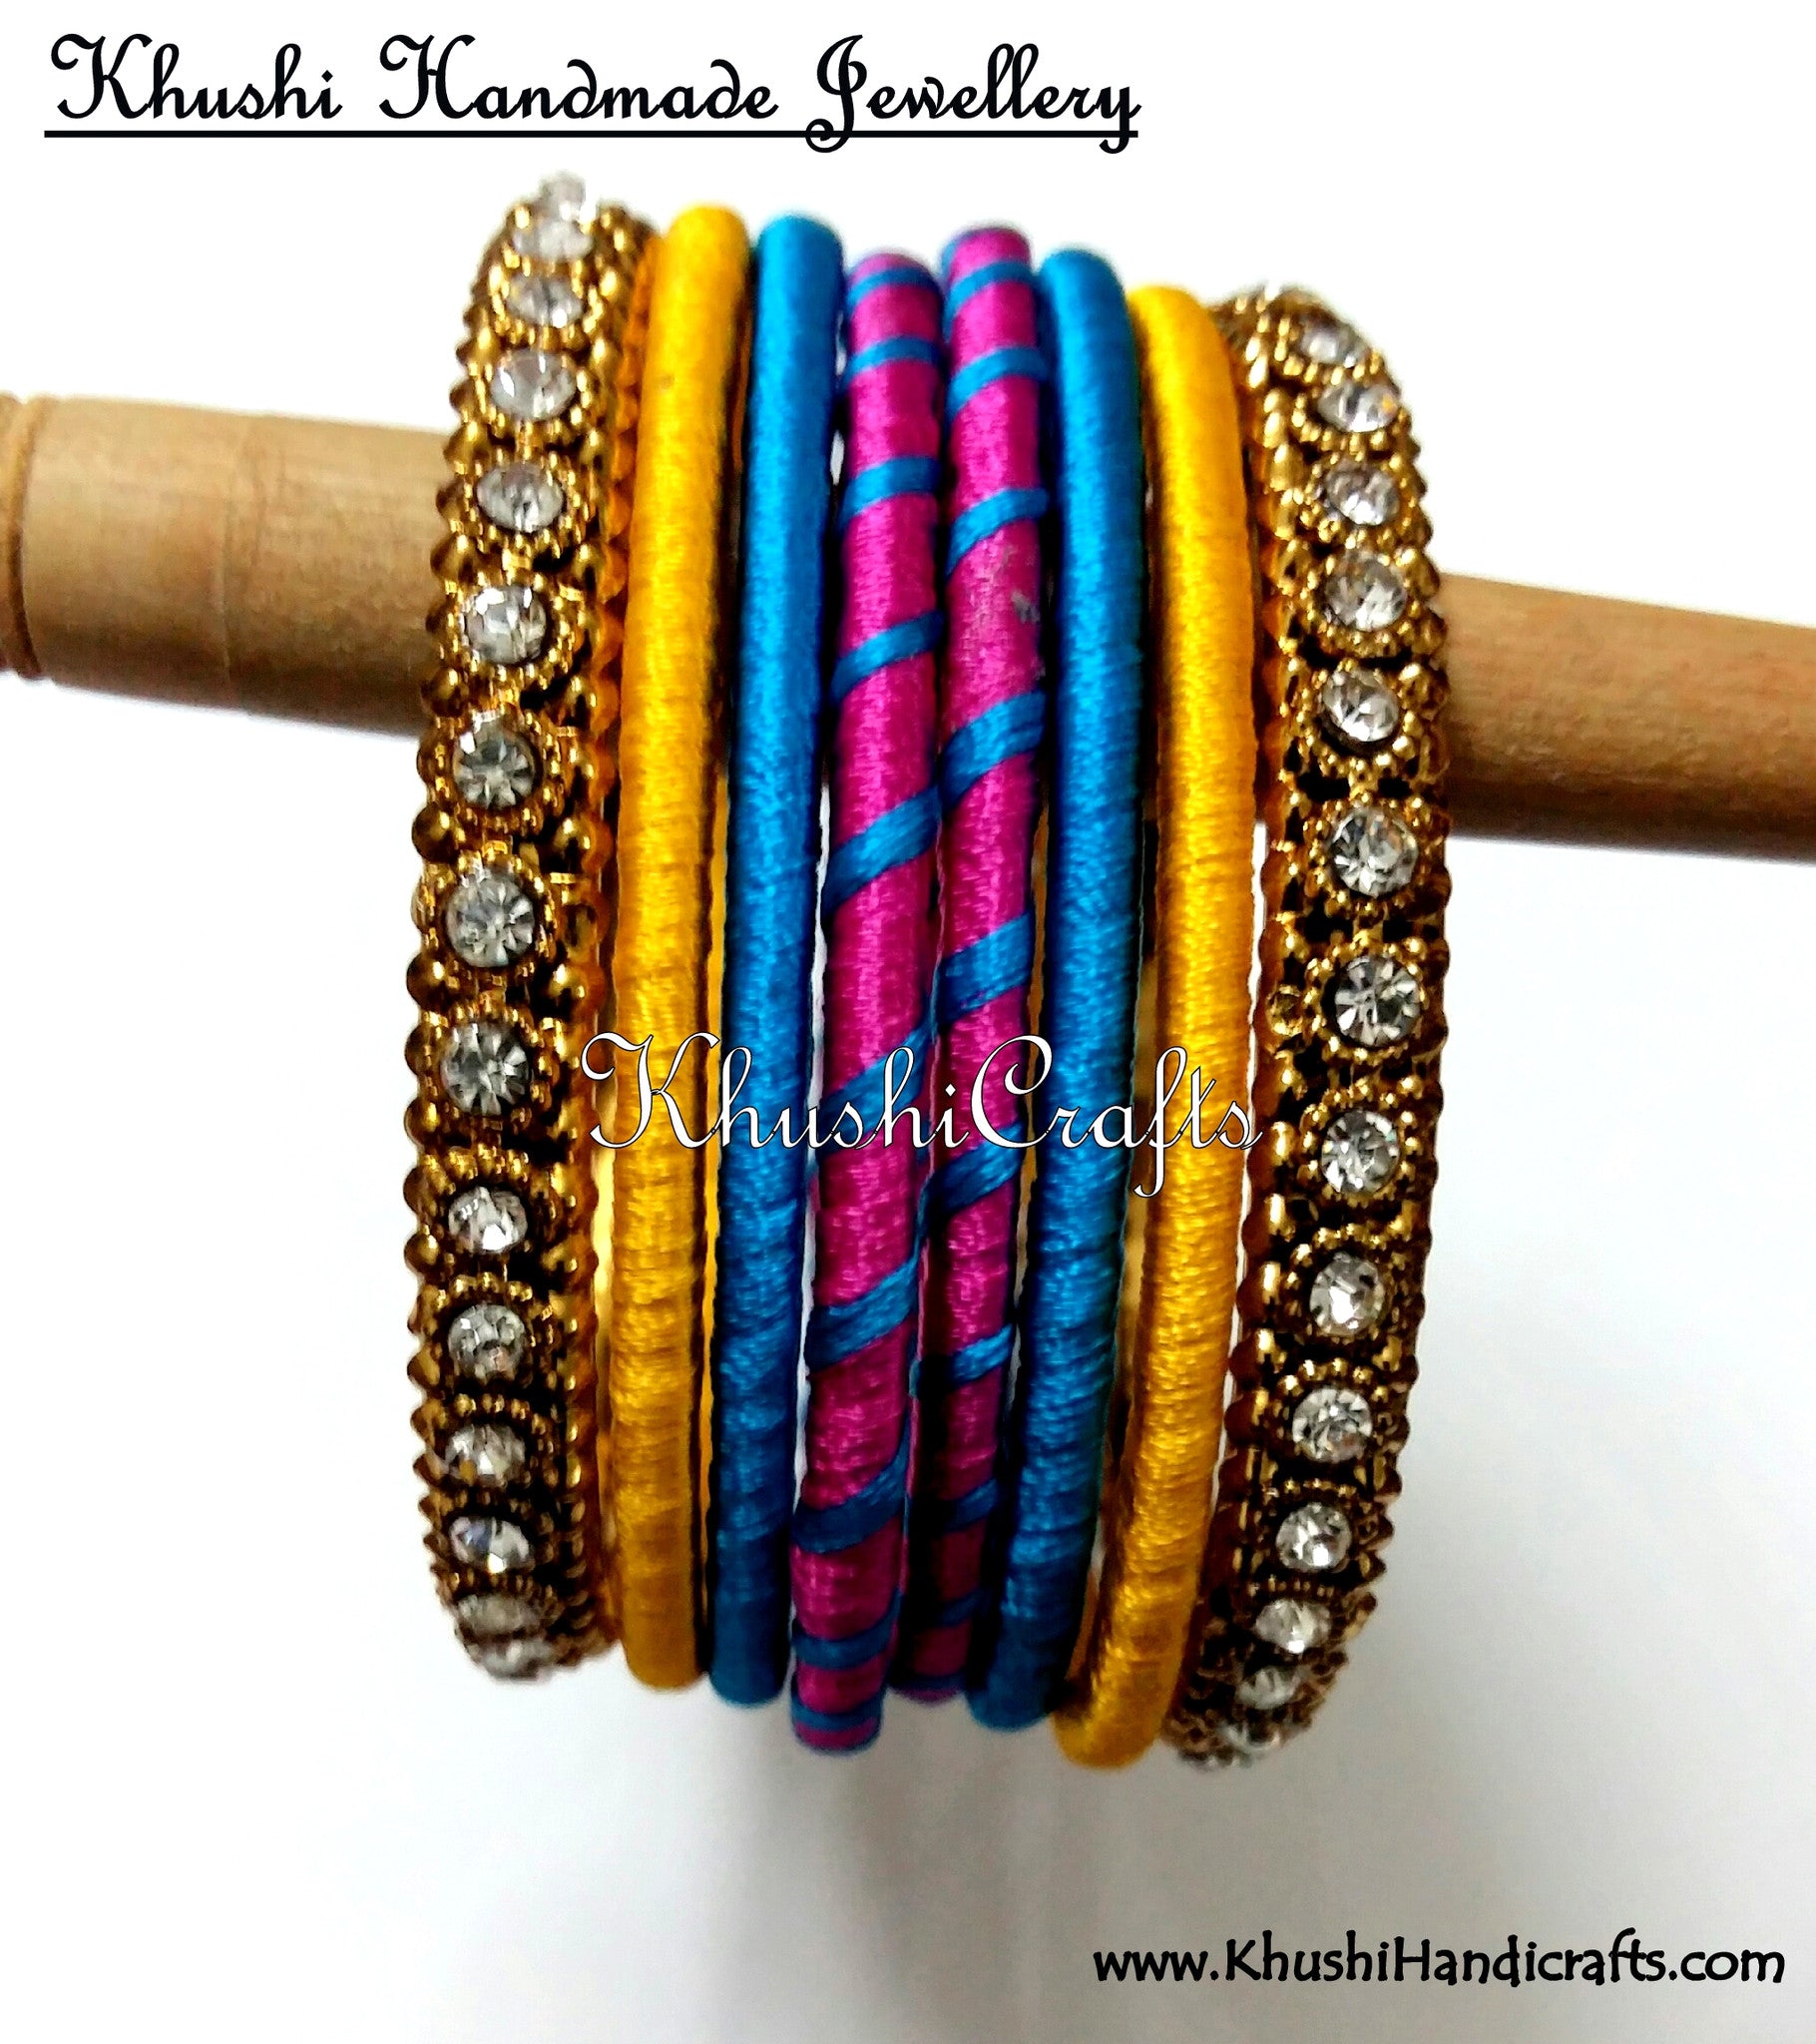 Hand-crafted exquisite Silk Bangles in Pink Blue and Yellow - Khushi Handmade Jewellery